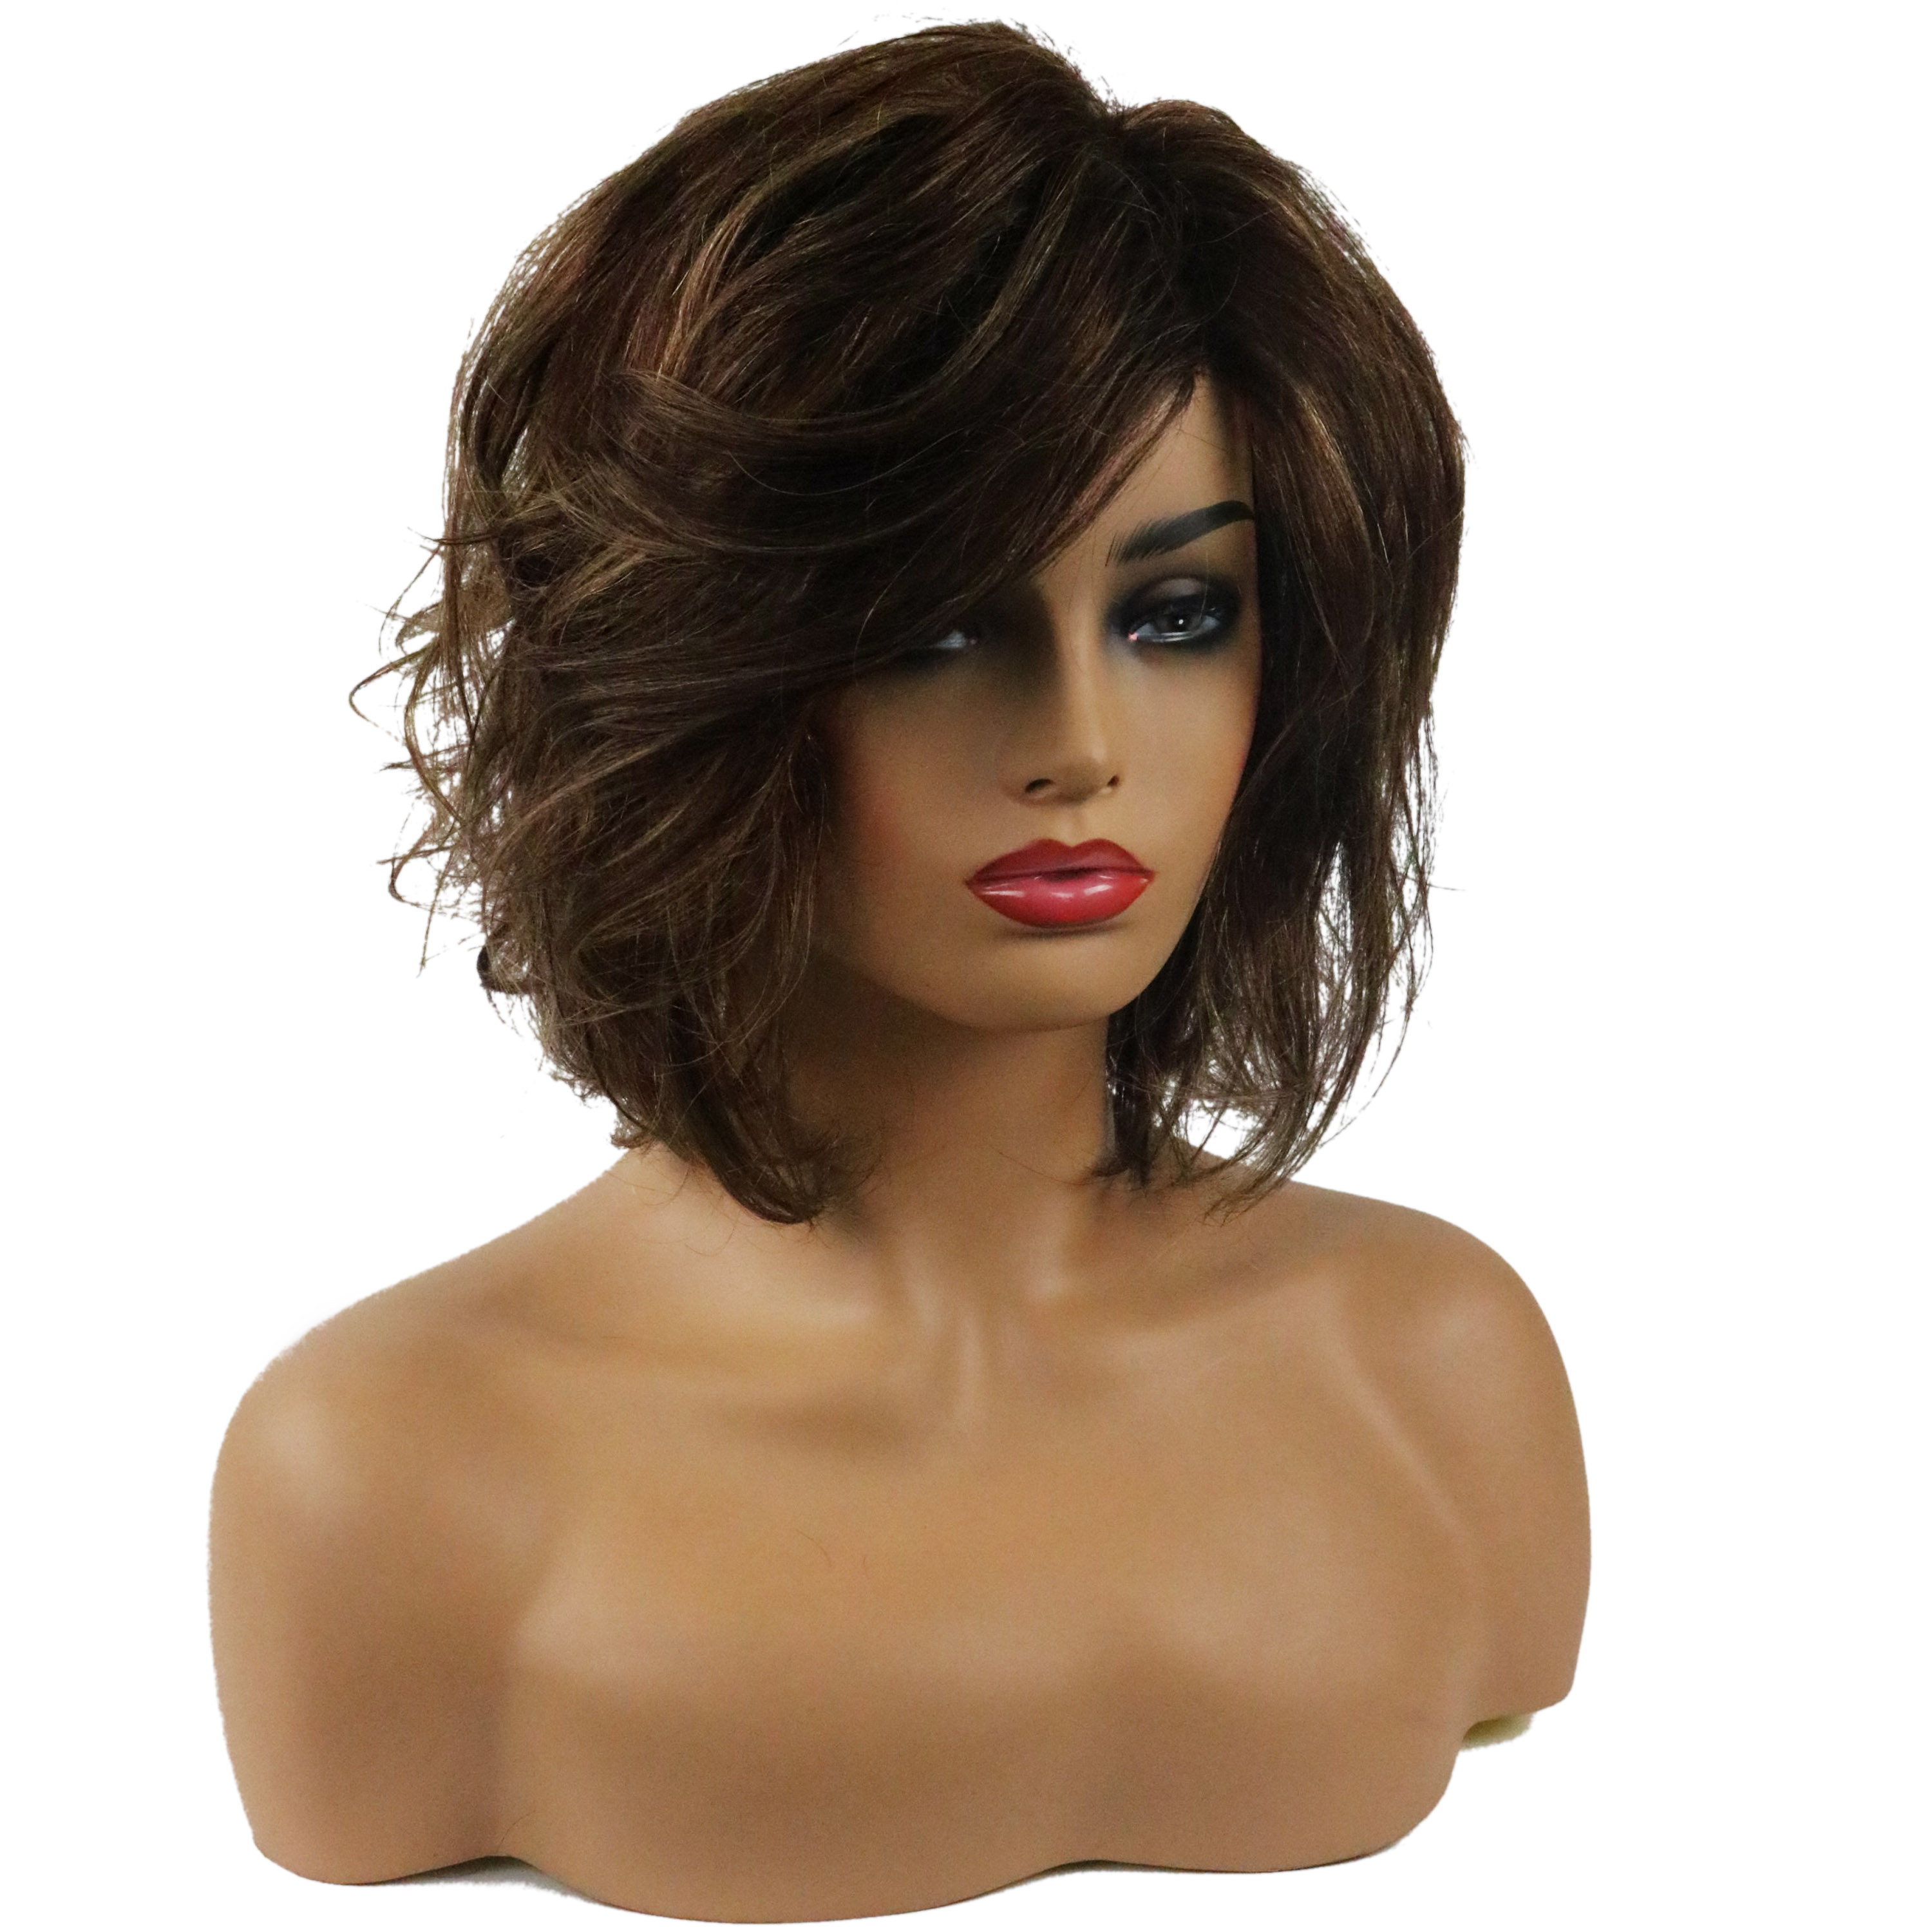 Hot Loose Wave Side Swept Human Hair Women Capless Wigs 10 Inches